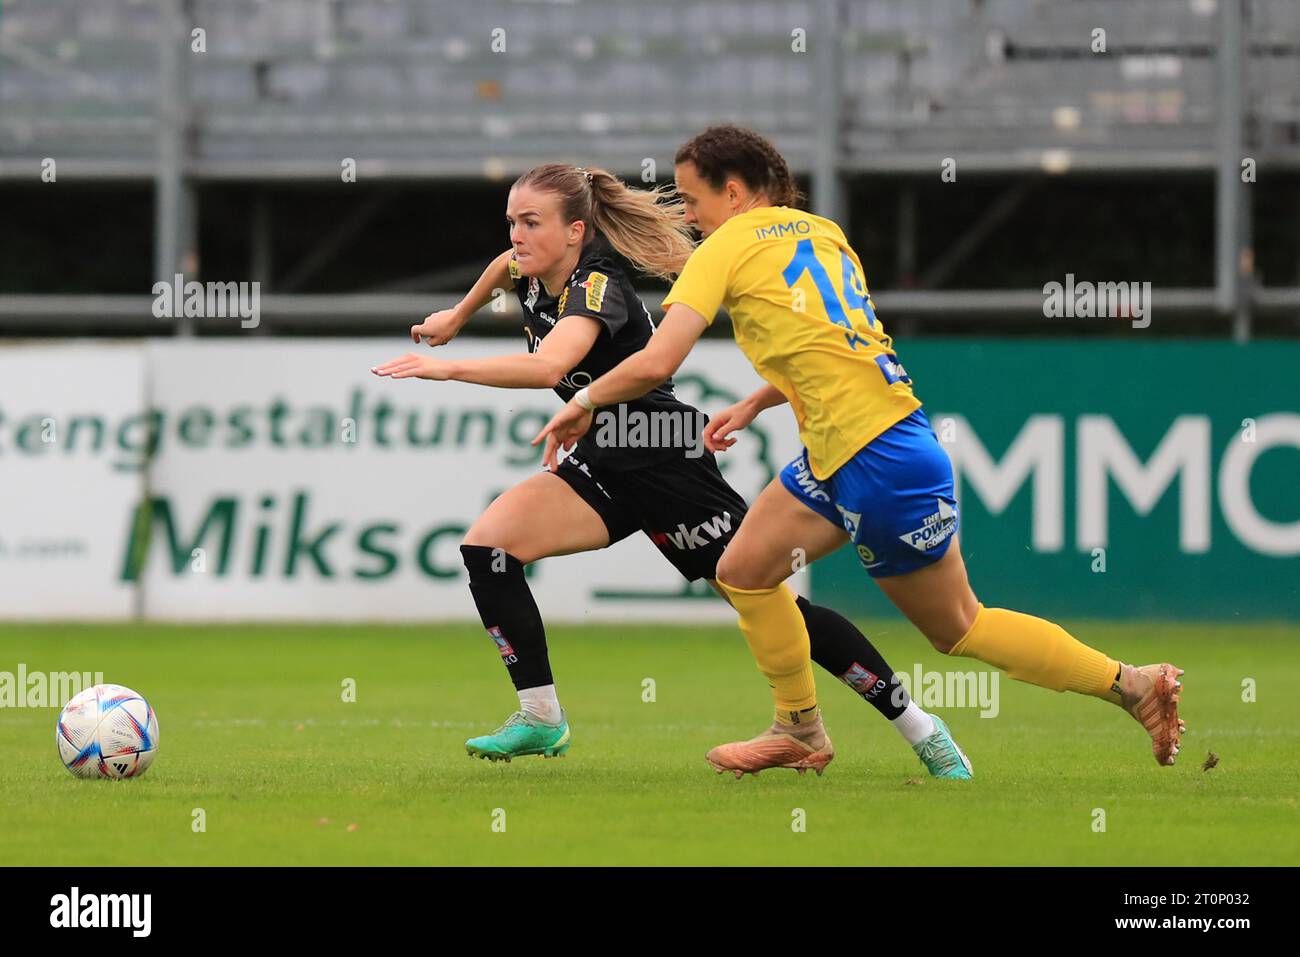 Julia Kofler (19 Altach) in action during the Admiral Frauen Bundesliga match First Vienna FC vs SCR Altach at Hohe Warte  (Tom Seiss/ SPP) Stock Photo